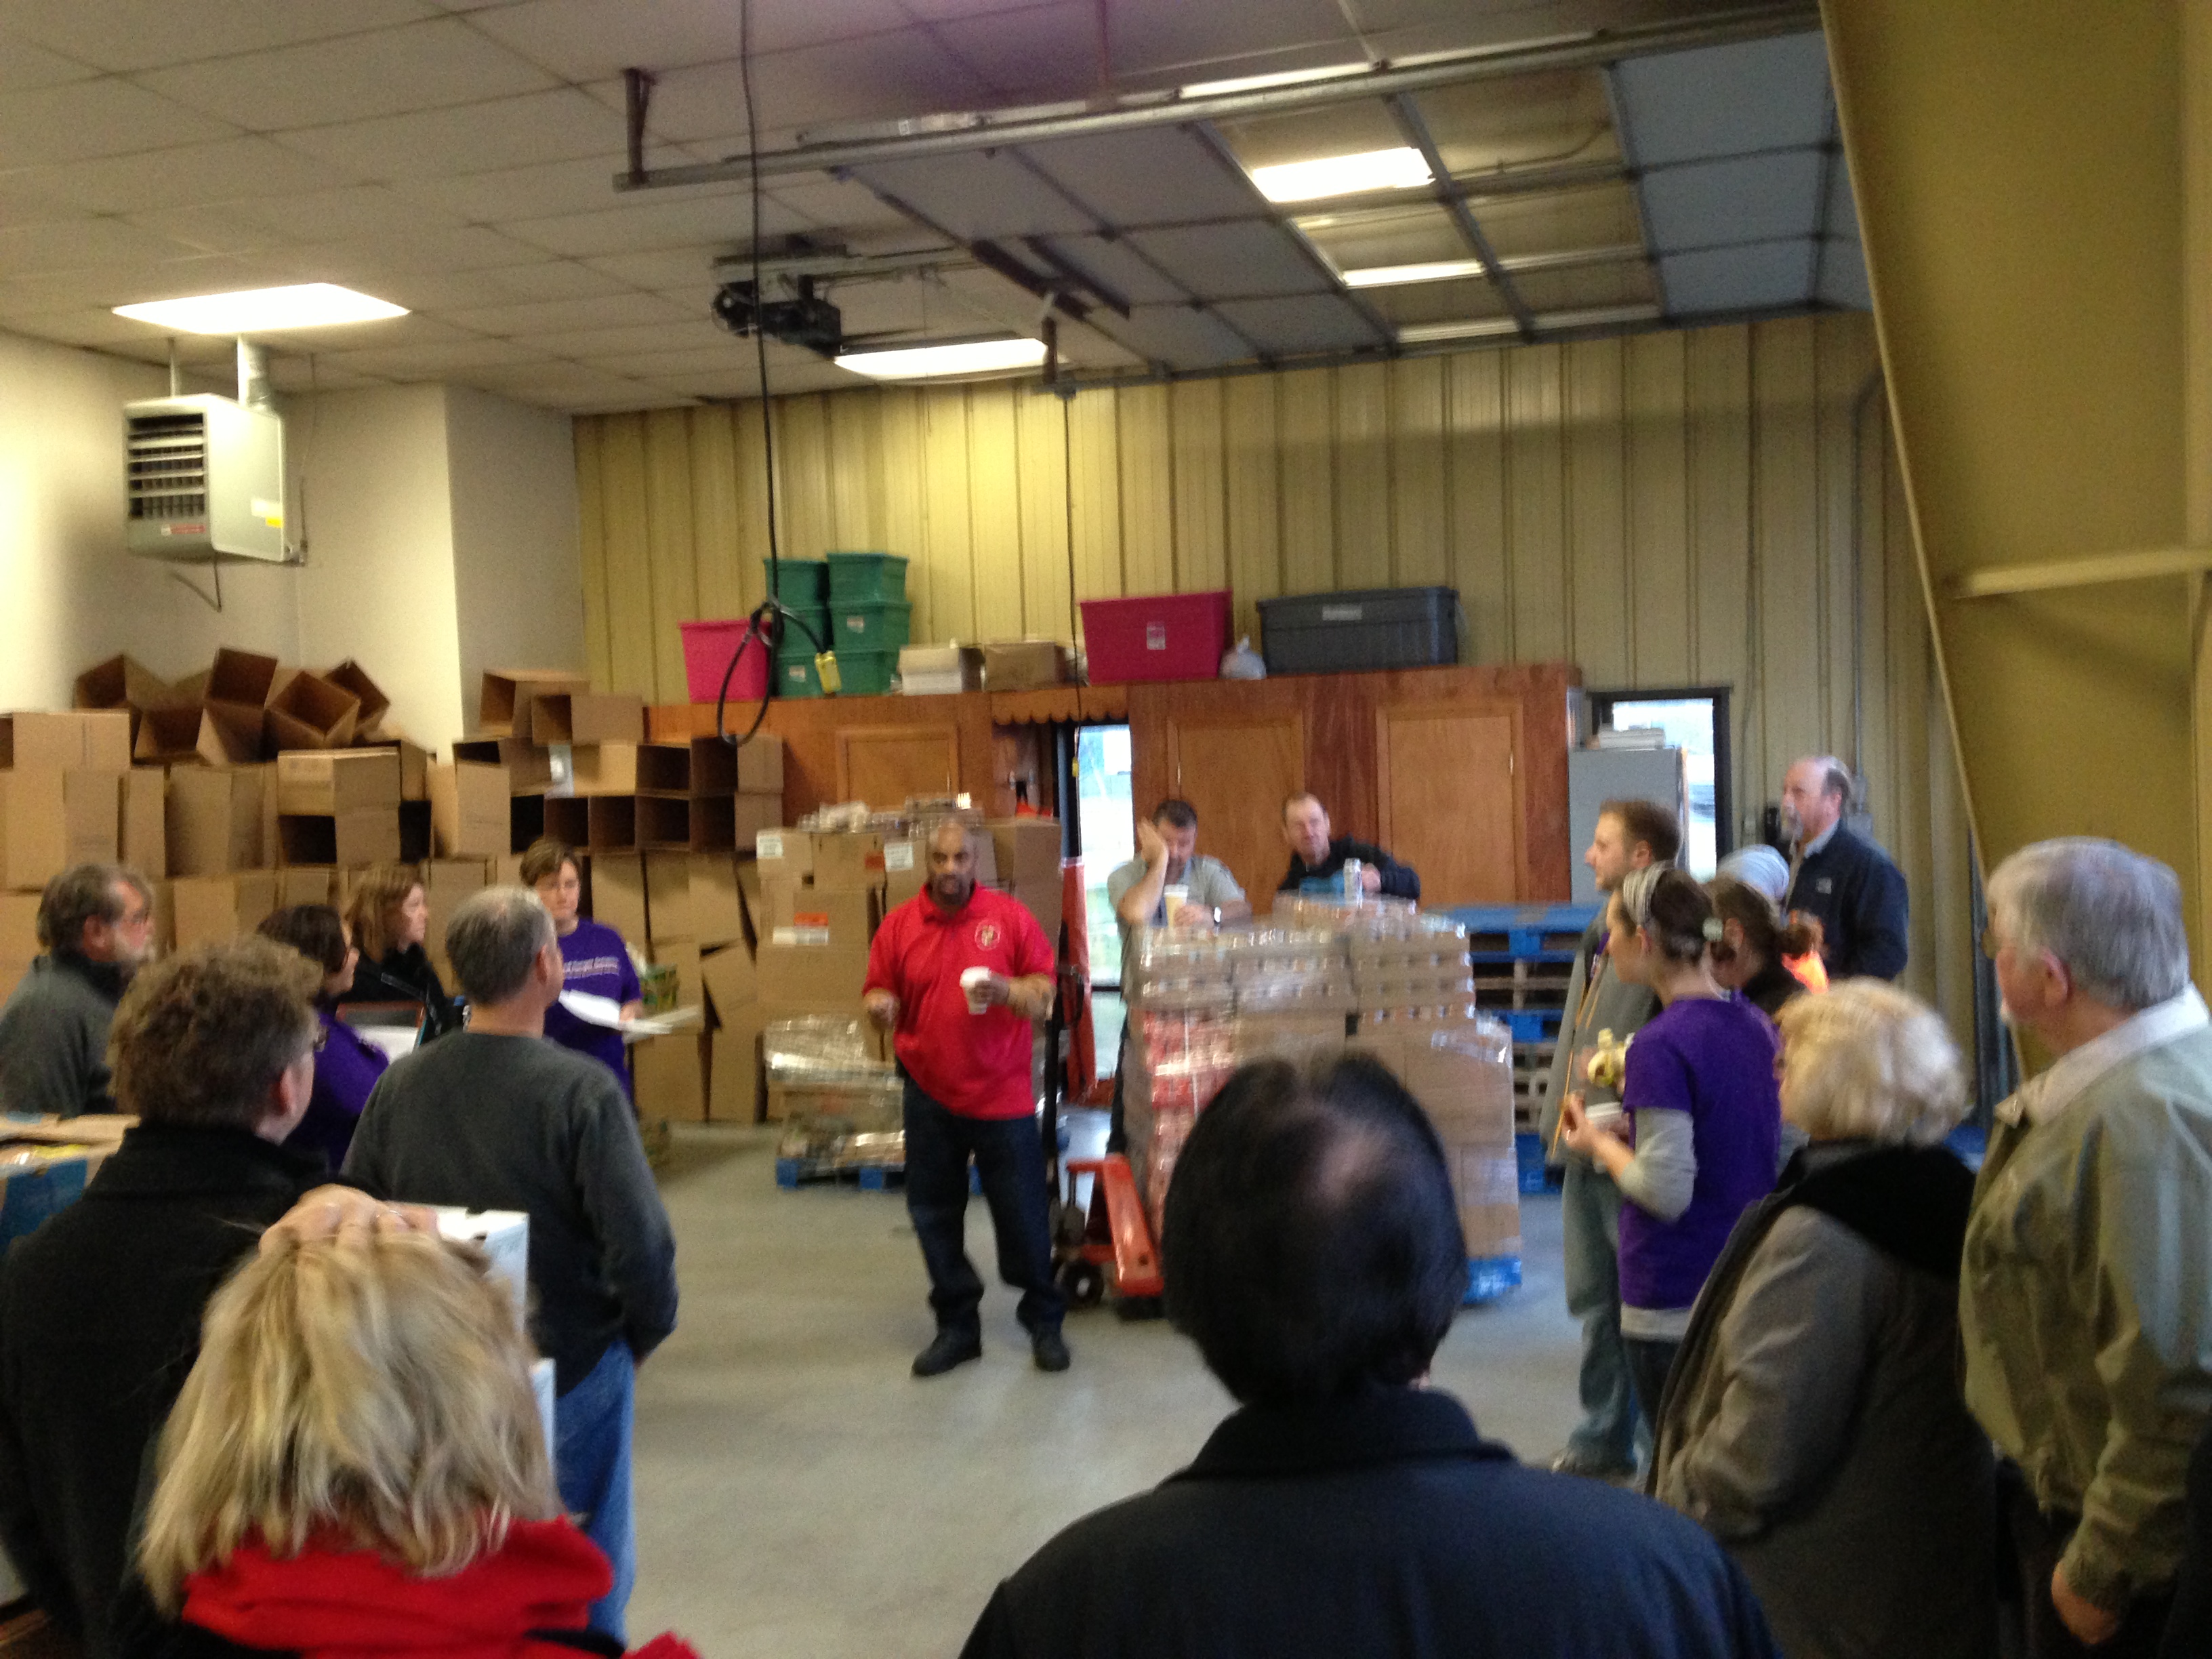 Workers prepare food boxes for Sandy-affected residents in Crisfield, MD.